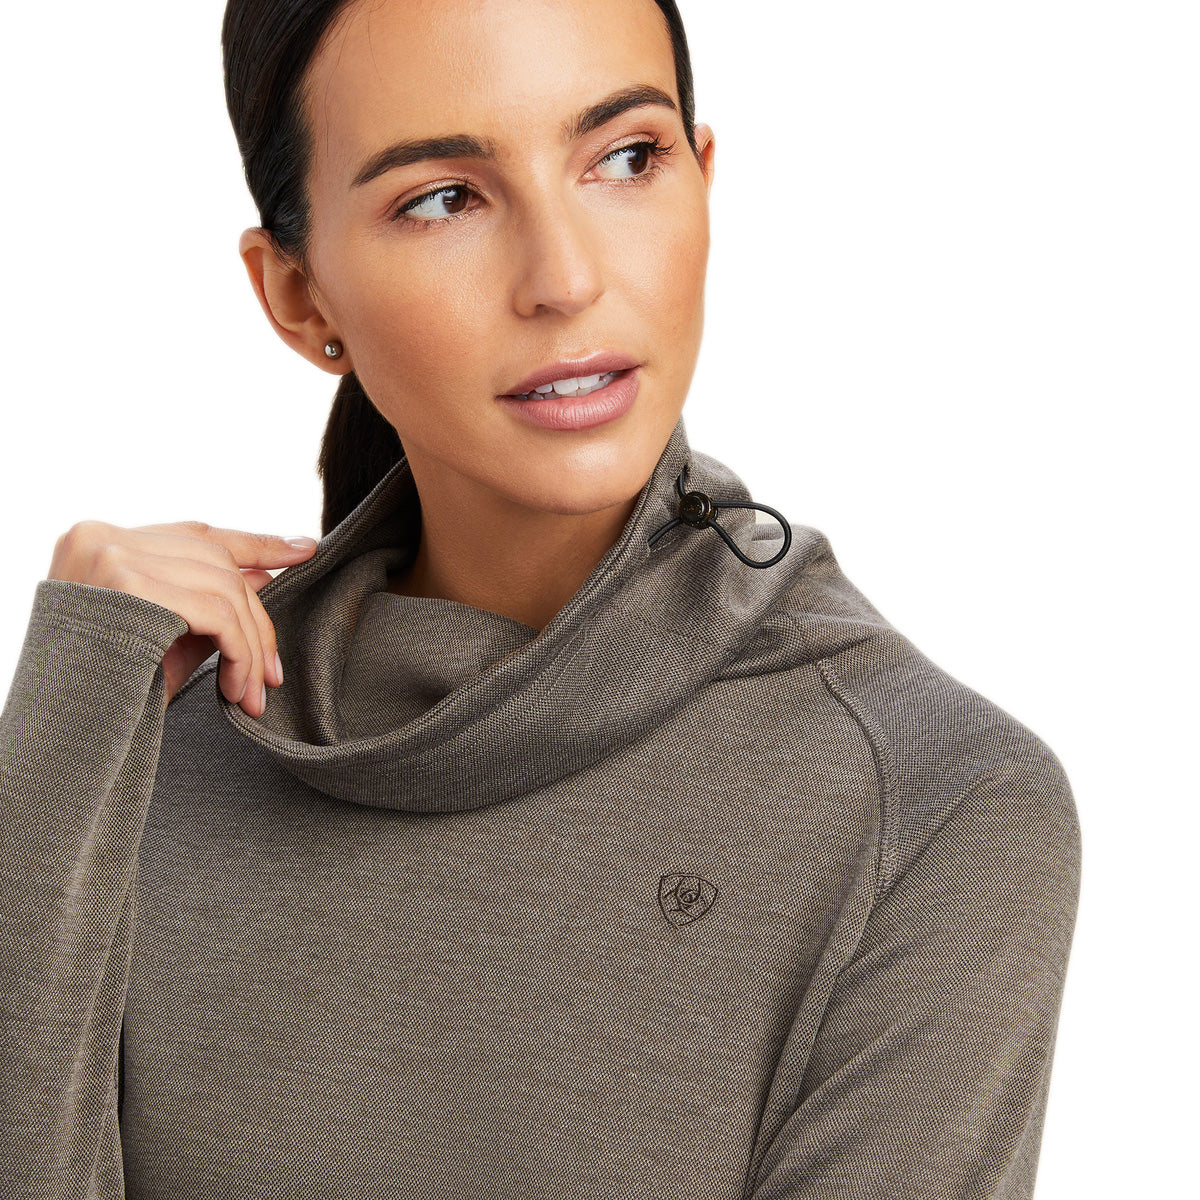 Ariat Women's Canny Long Sleeve Top - Sale